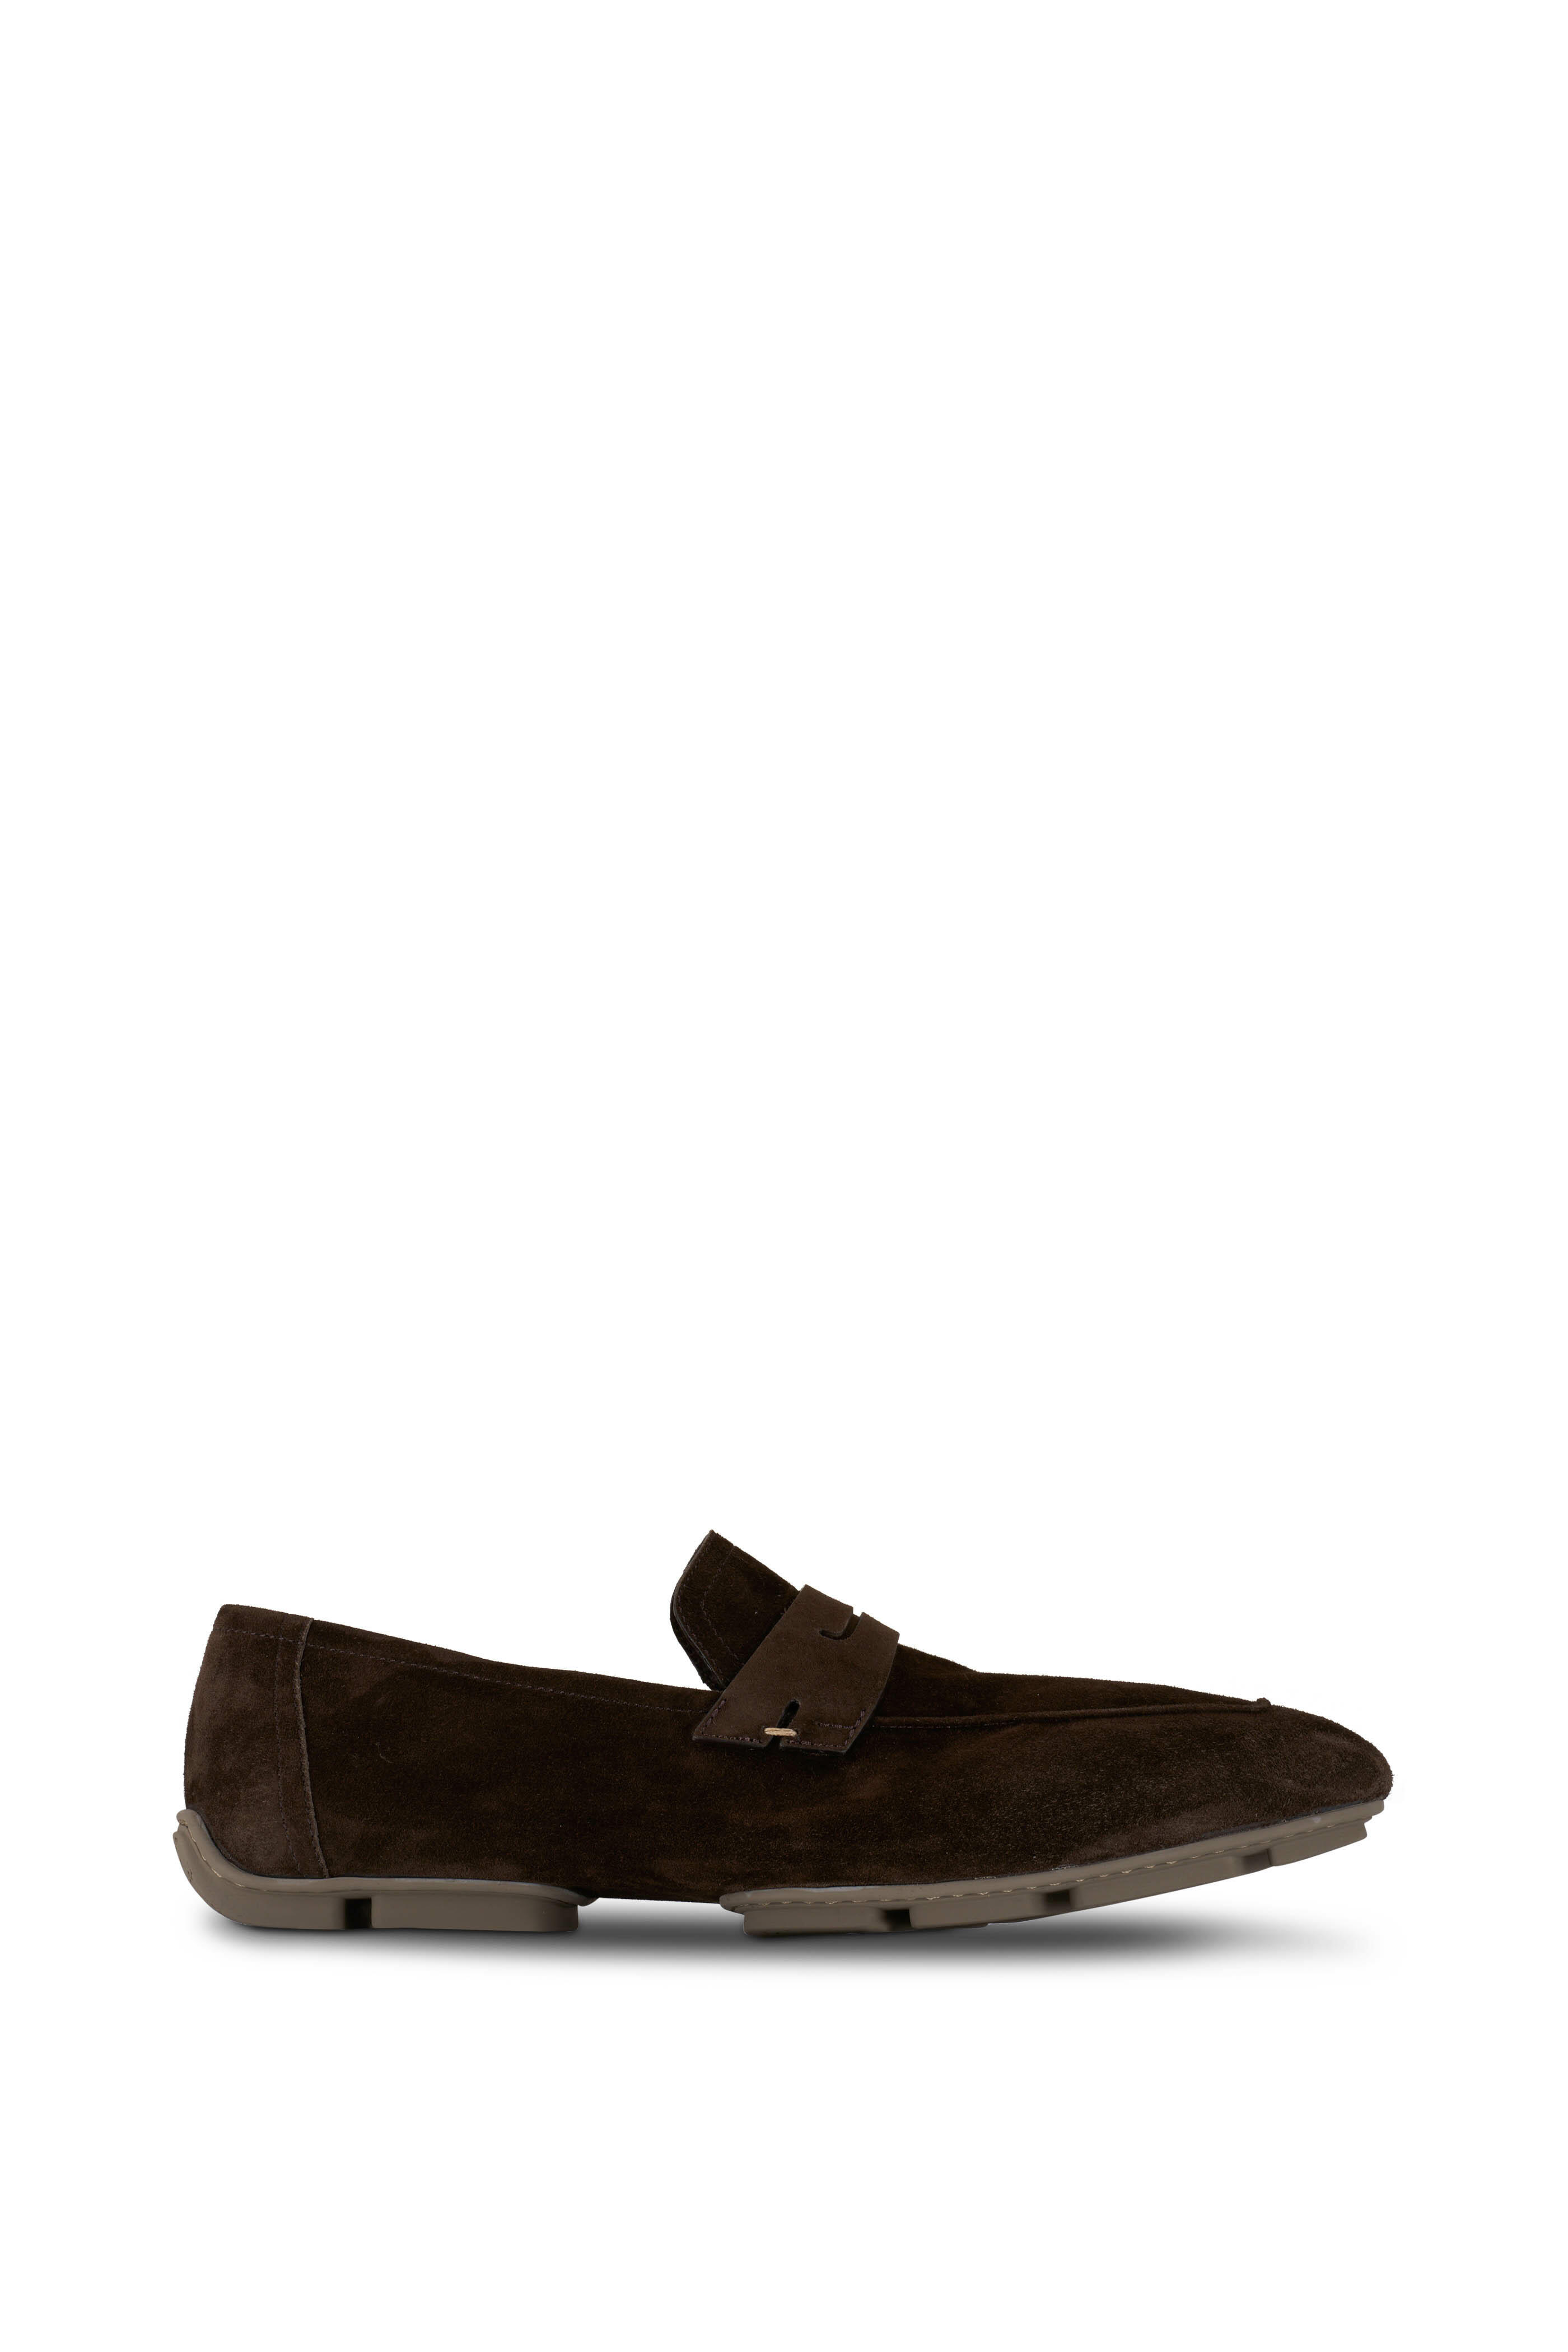 Berluti - Lorenzo Drive Pepper Suede Loafer | Mitchell Stores